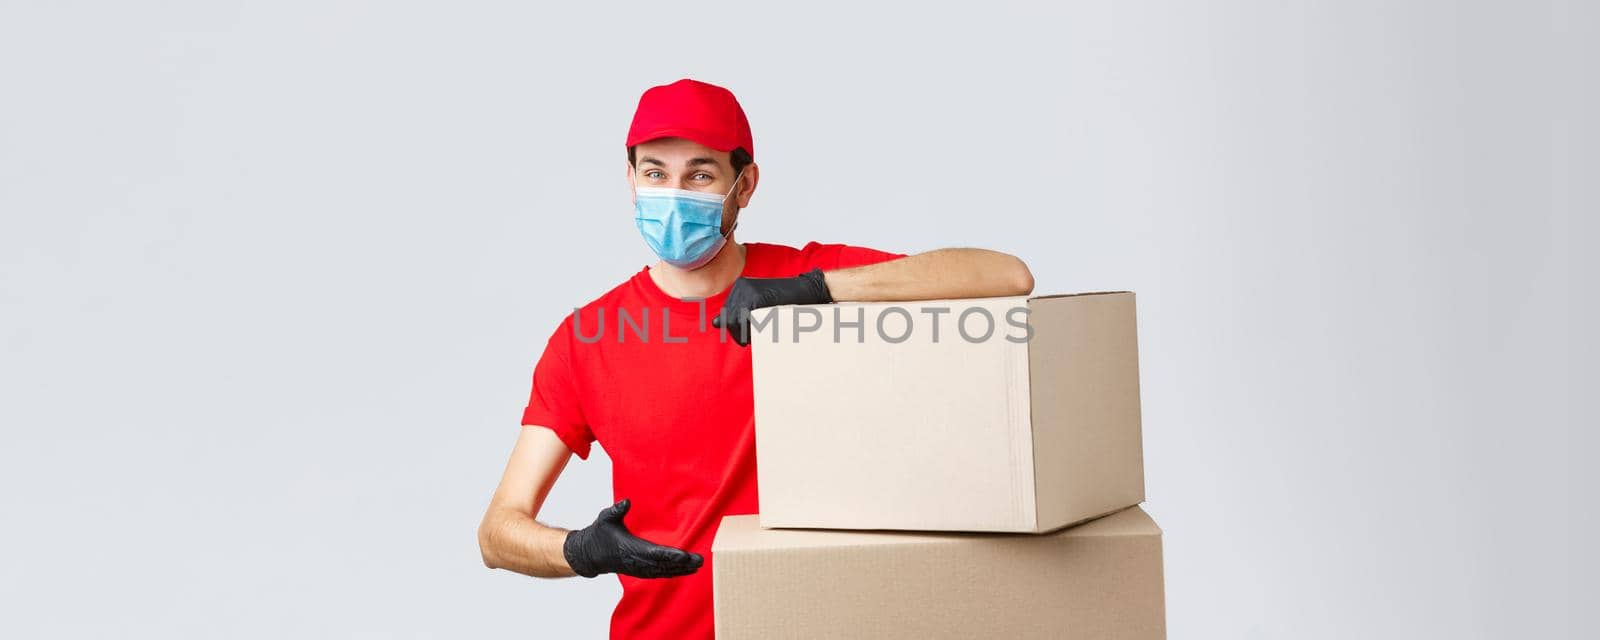 Packages and parcels delivery, covid-19 quarantine and transfer orders. Smiling courier in red uniform, gloves and medical face mask, introduce boxes to transfer your order, recommend service by Benzoix